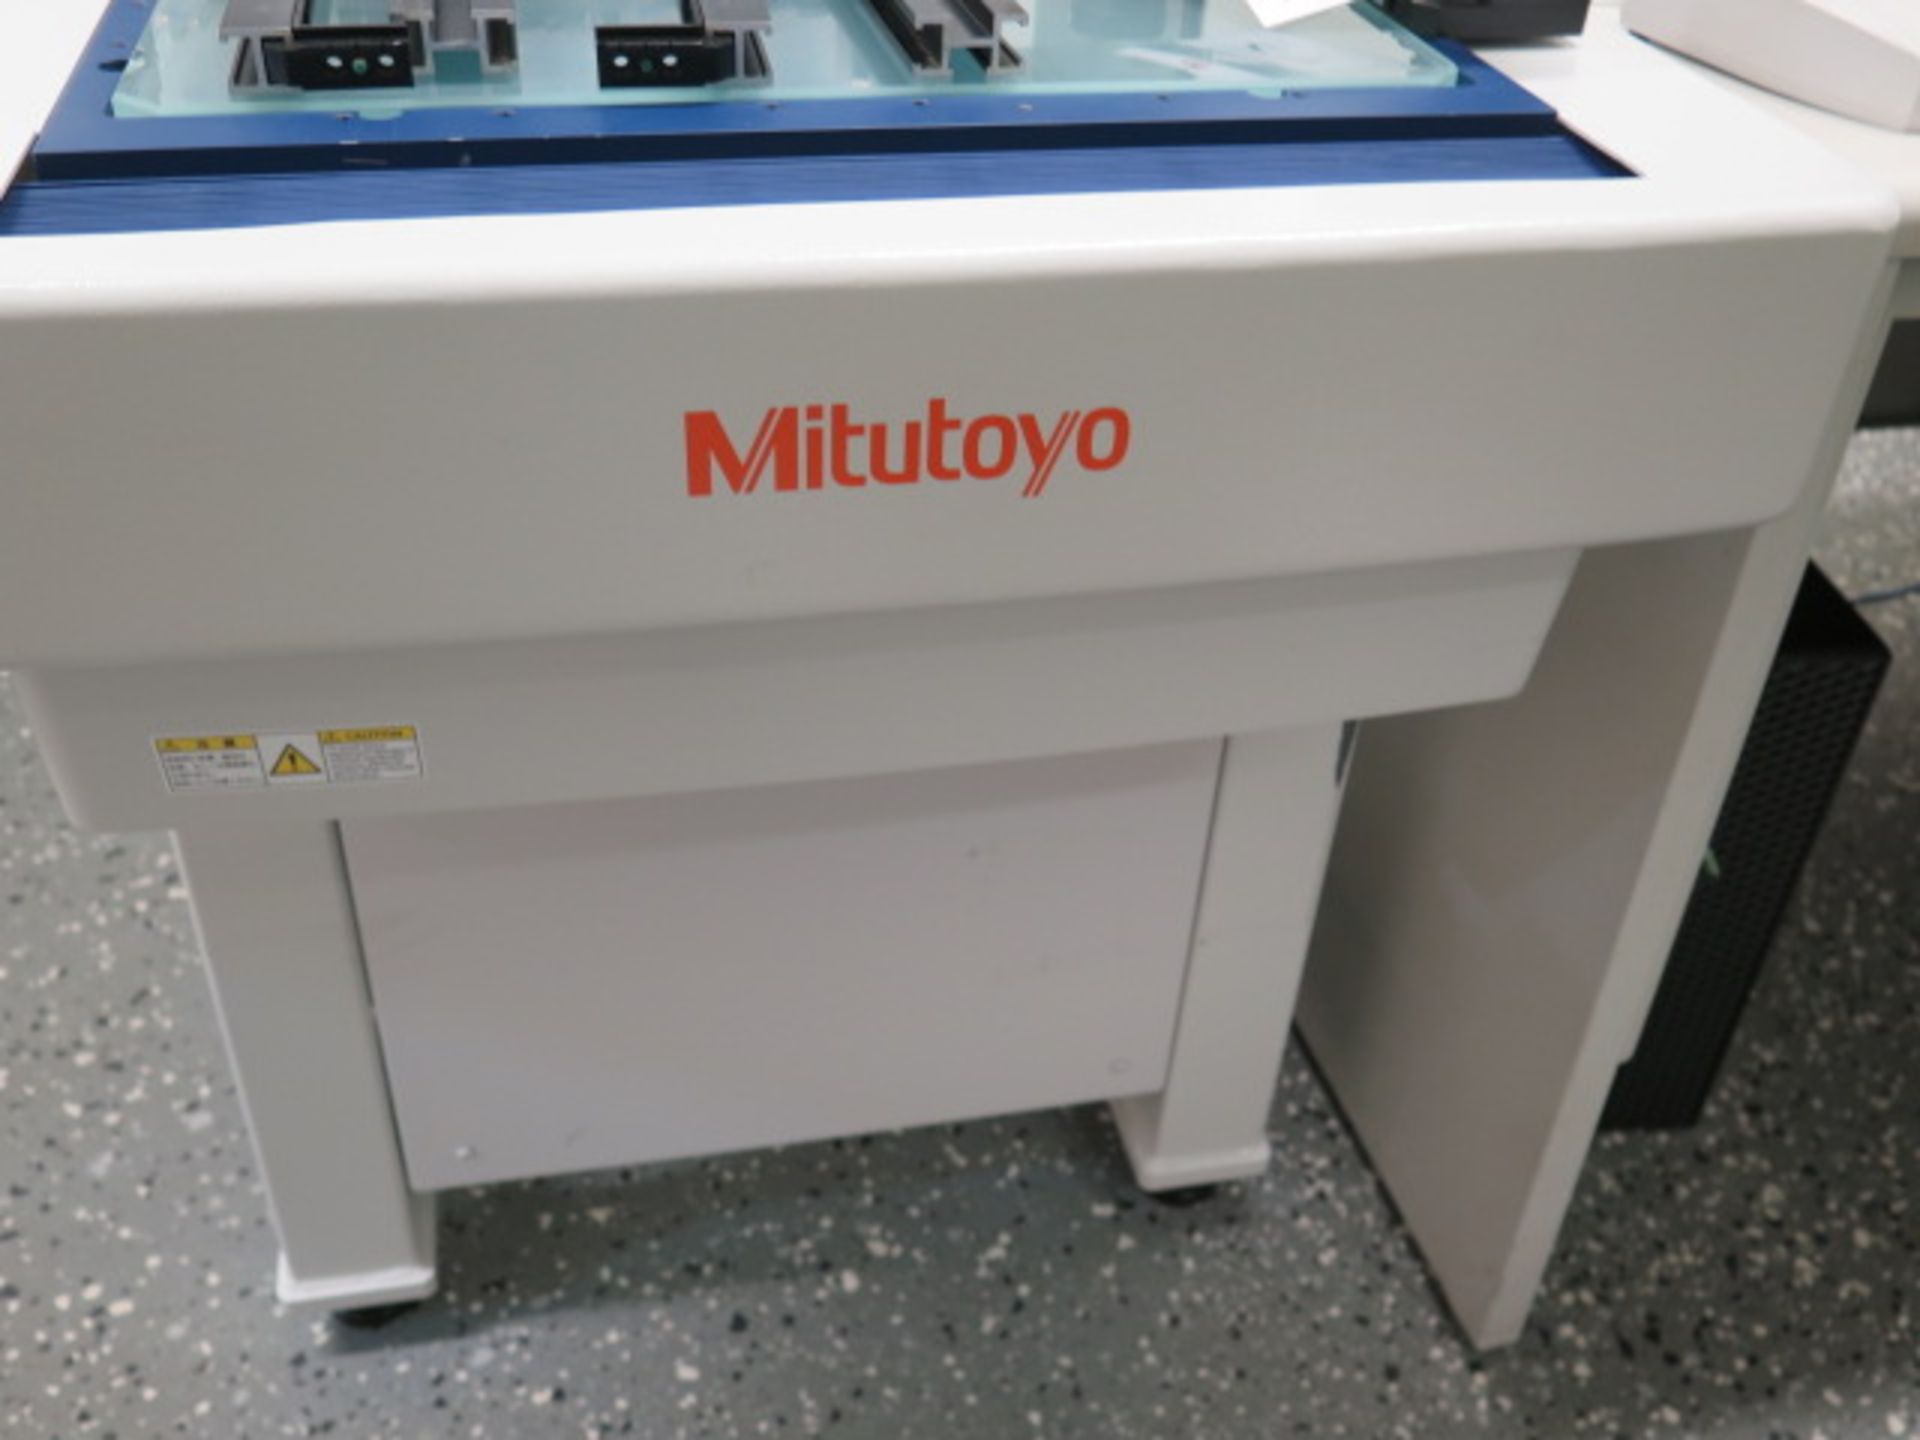 2019 Mitutoyo “Quick Vision Active” QVT1-L404ZiL-D Video CMM s/n 62586233 w/ Renishaw, SOLD AS IS - Image 6 of 26